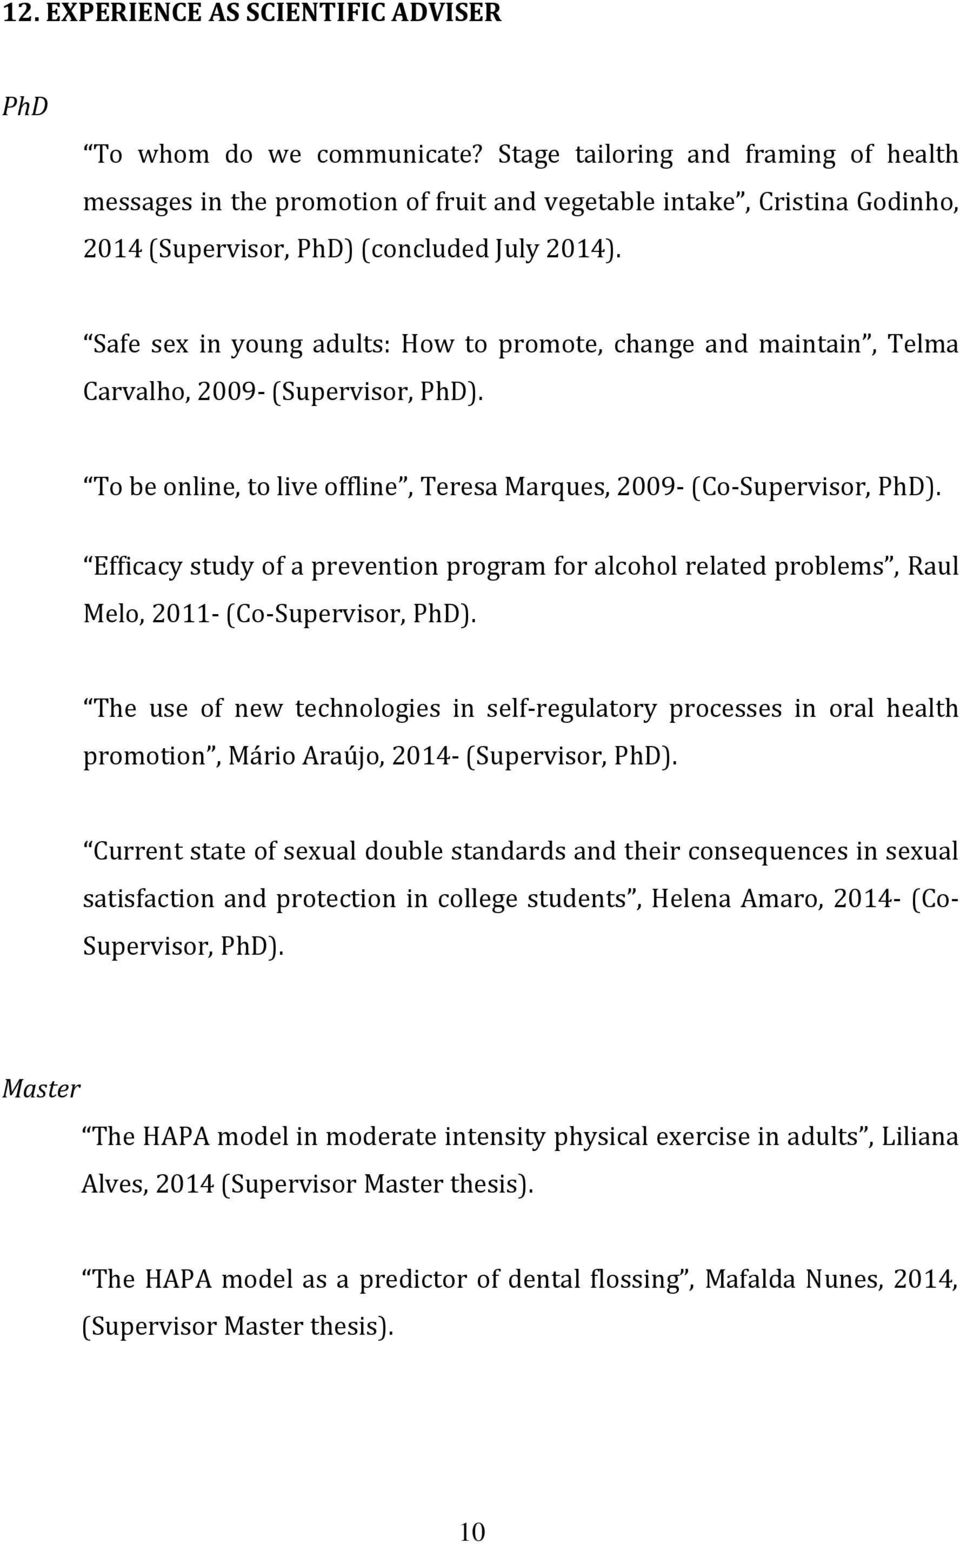 Safe sex in young adults: How to promote, change and maintain, Telma Carvalho, 2009- (Supervisor, PhD). To be online, to live offline, Teresa Marques, 2009- (Co-Supervisor, PhD).